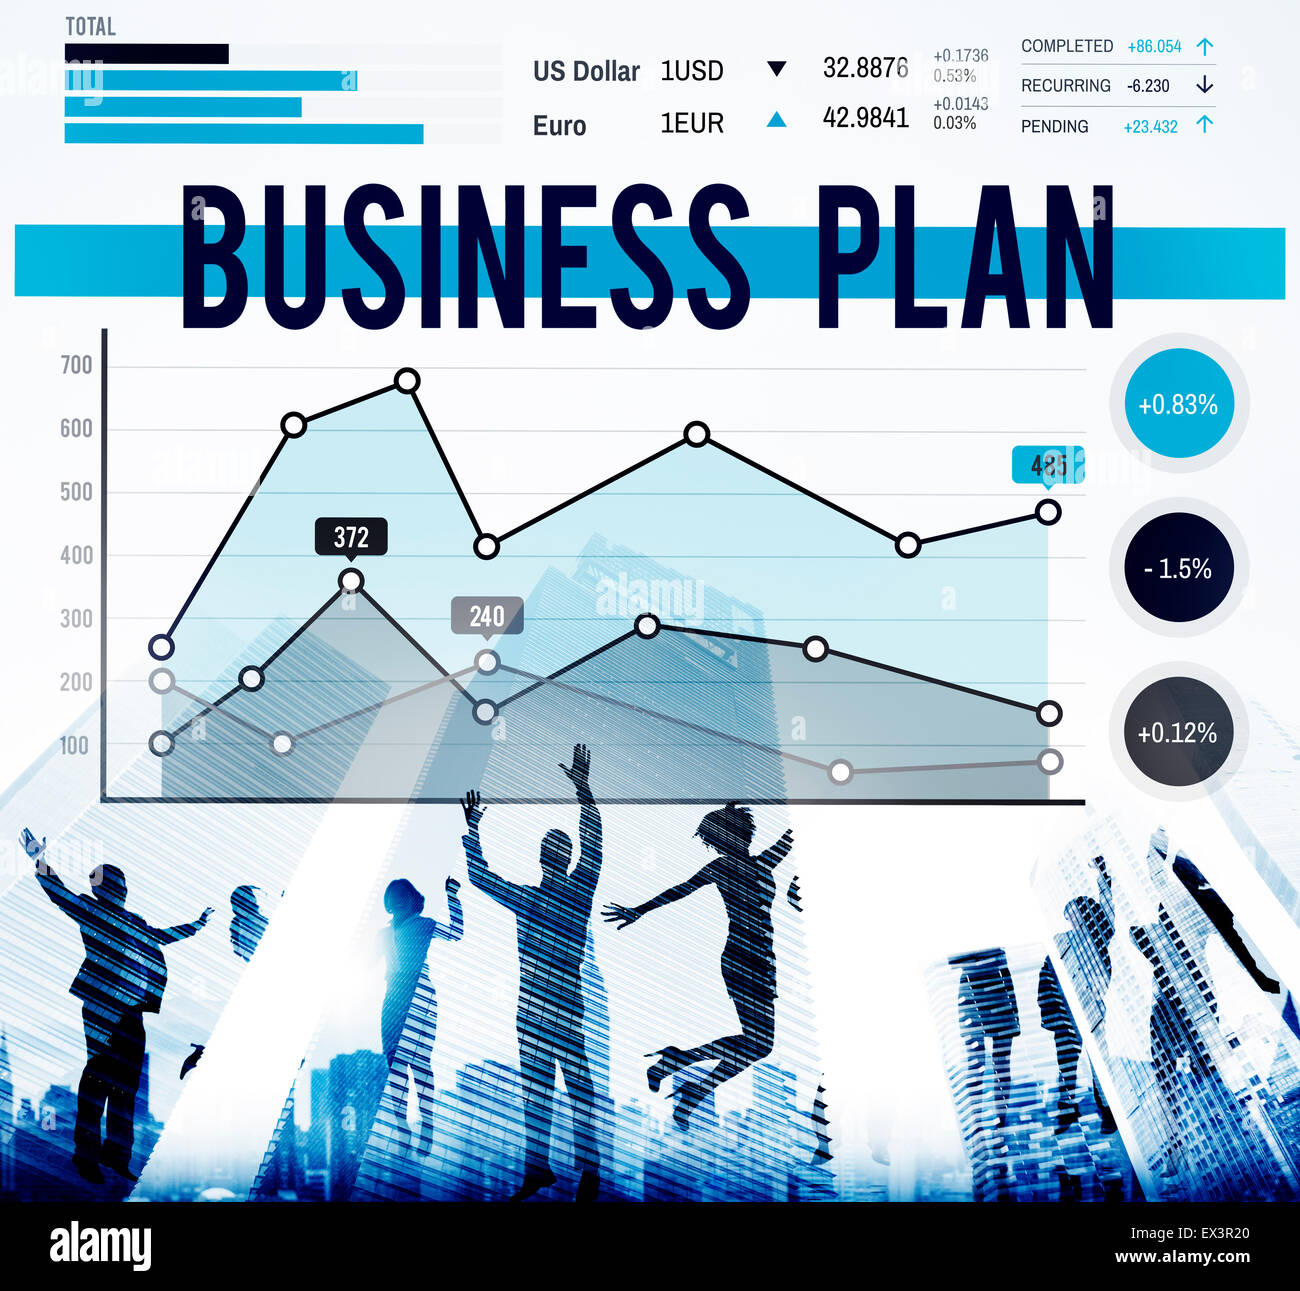 Business Plan Strategy Marketing Concept Stock Photo